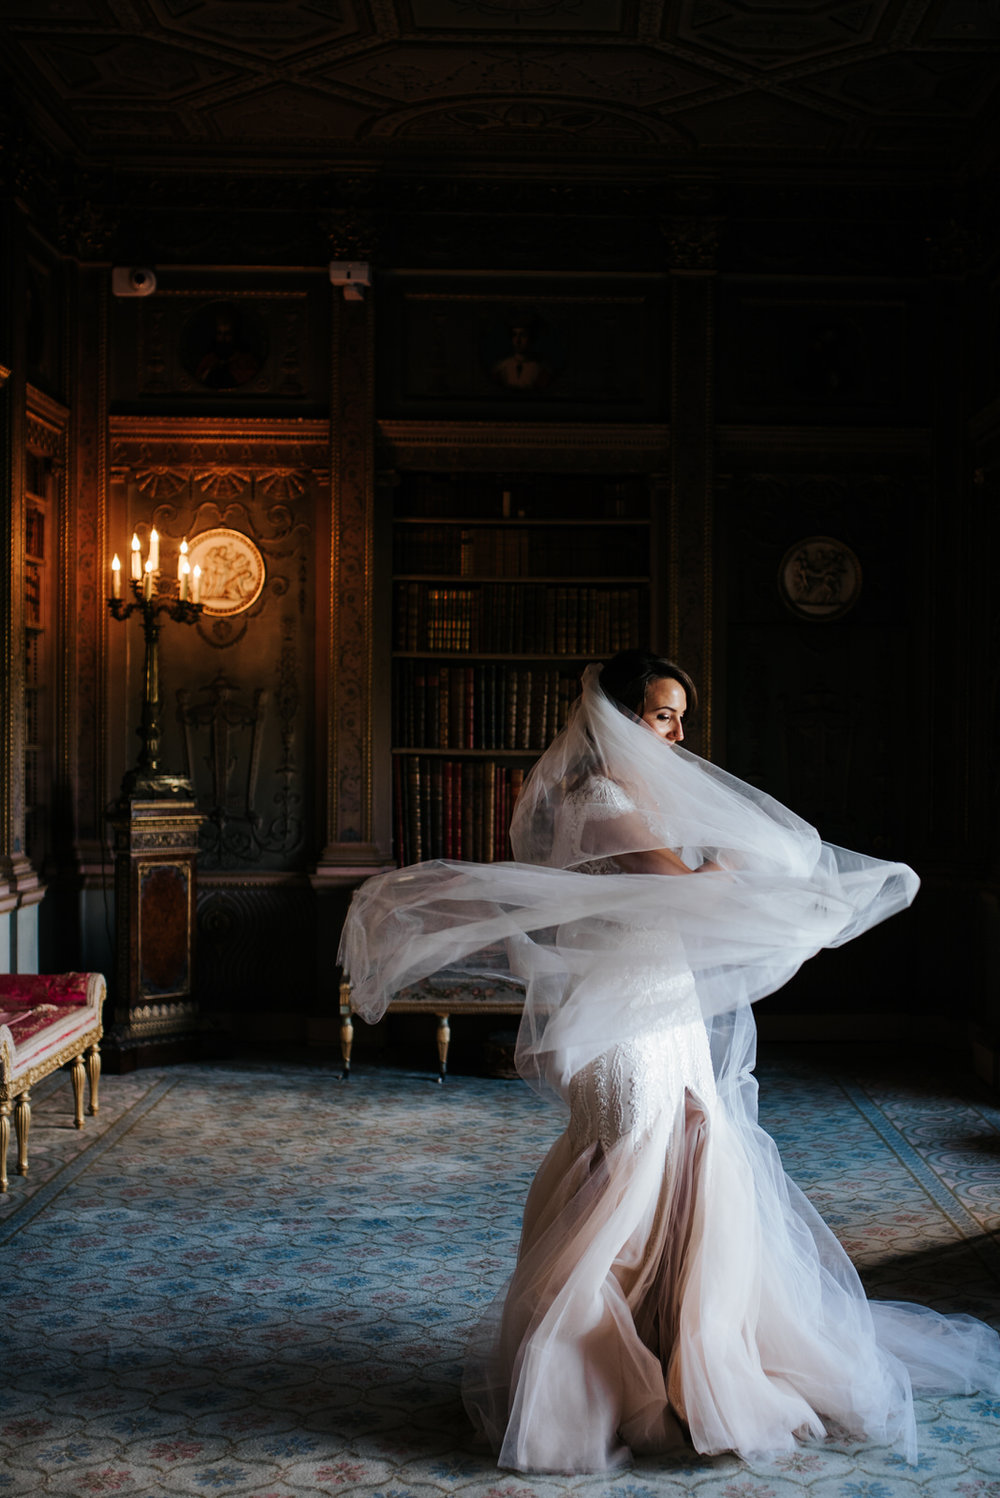 Bride twirls in her stunning dress and veil as light comes in from window